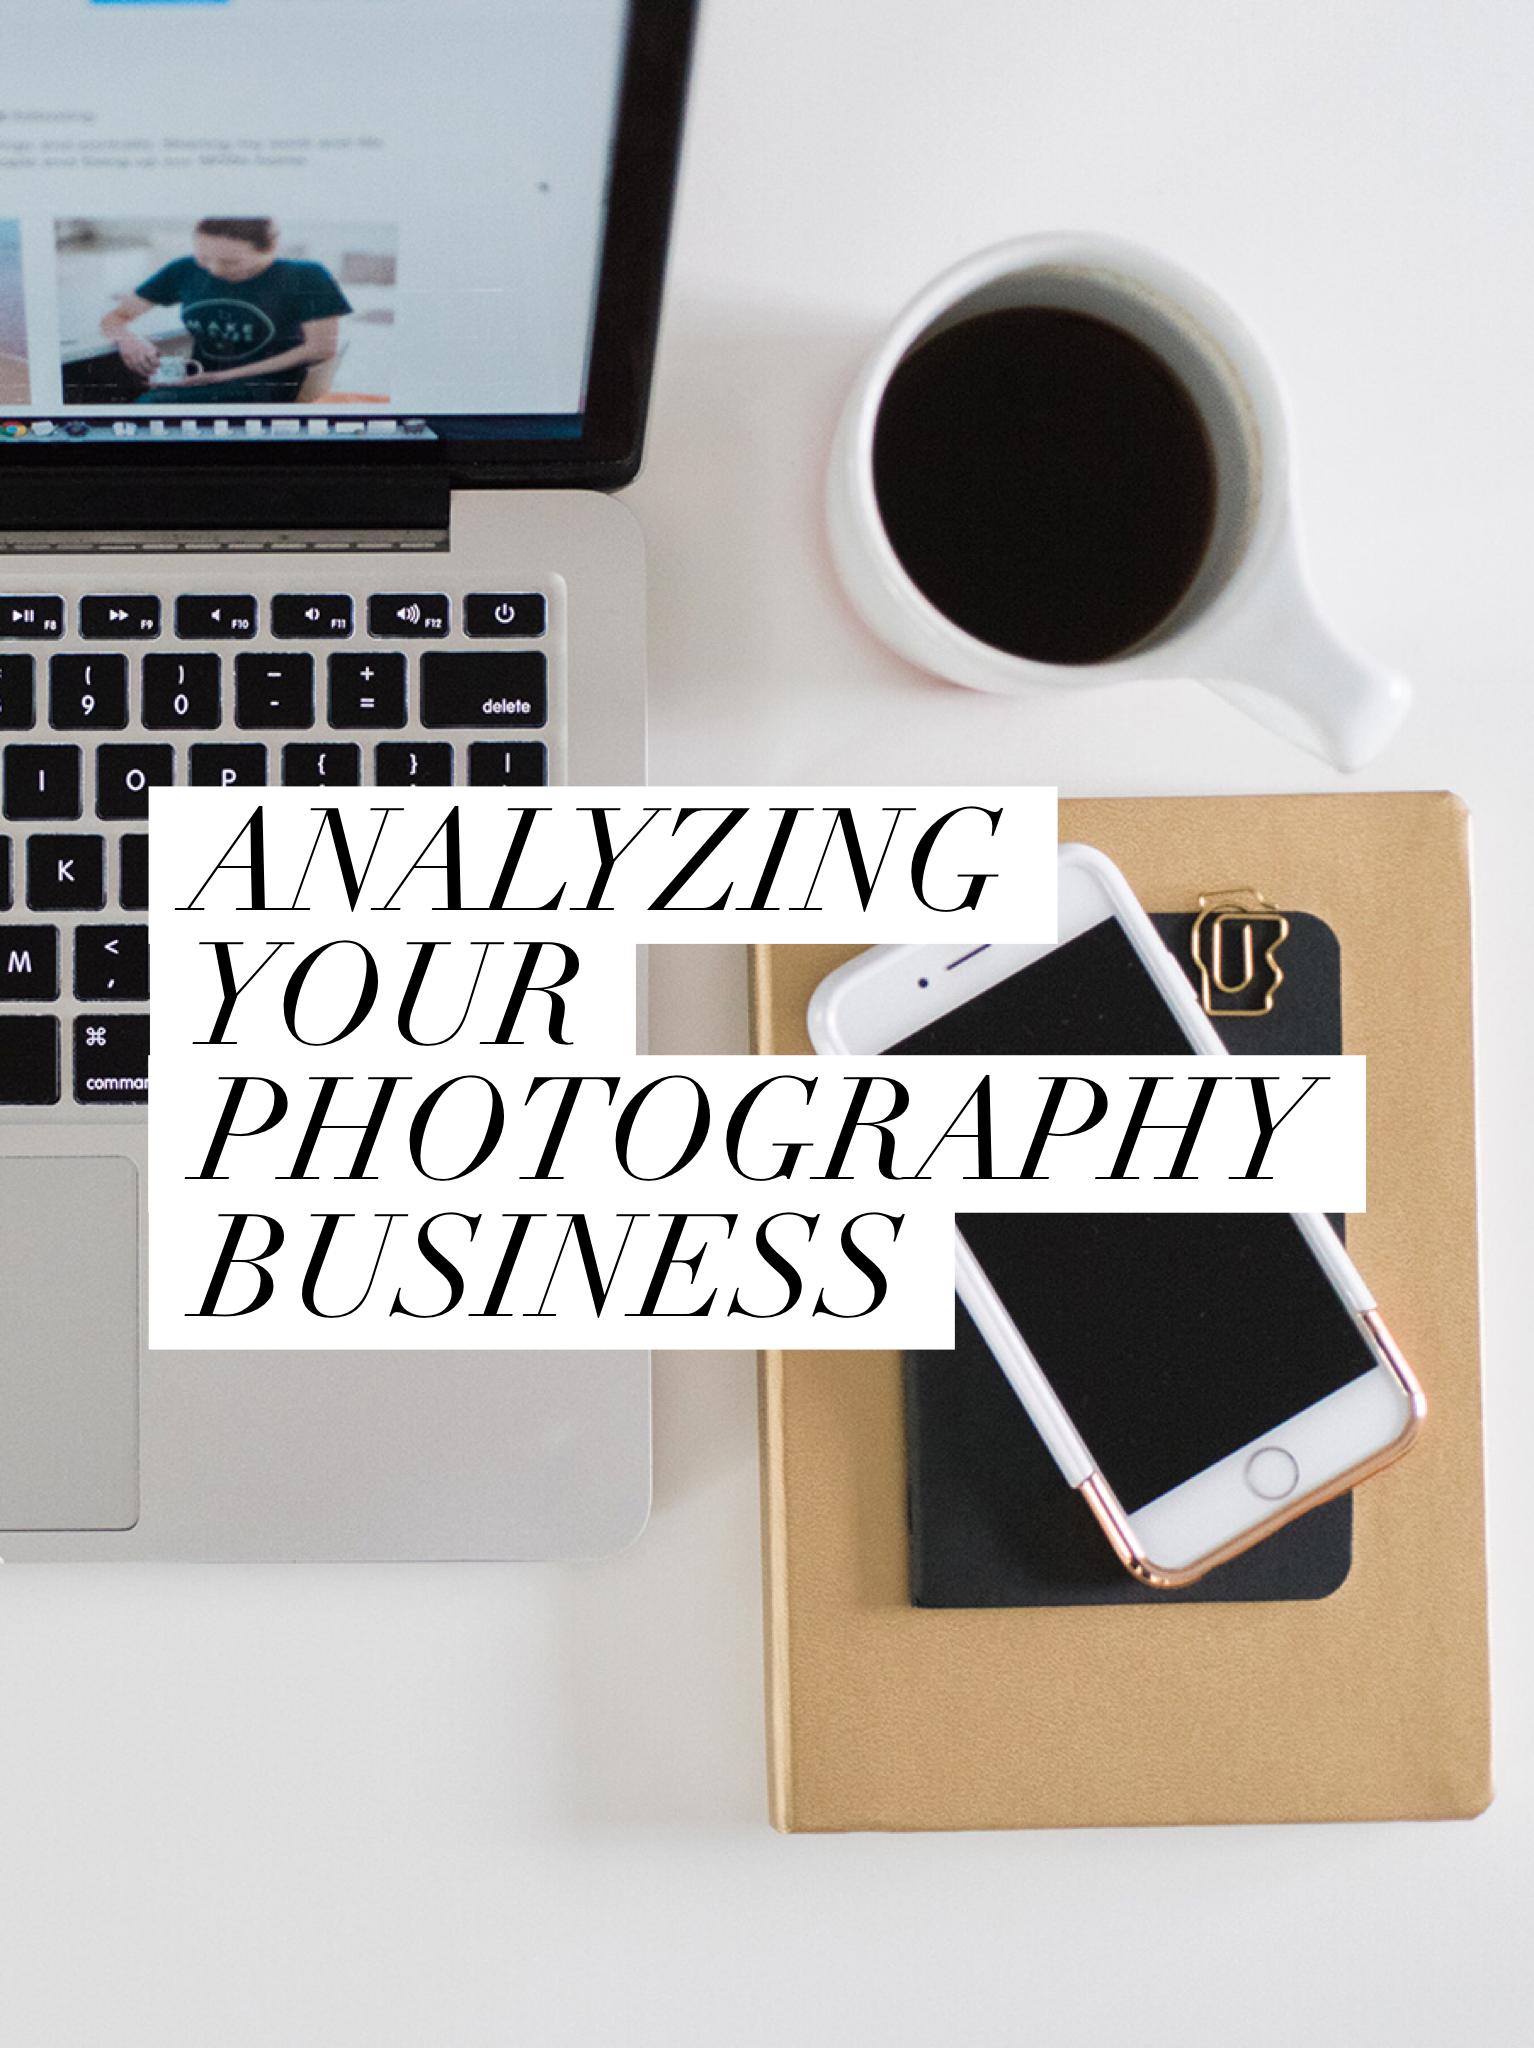 Analyzing your photography business